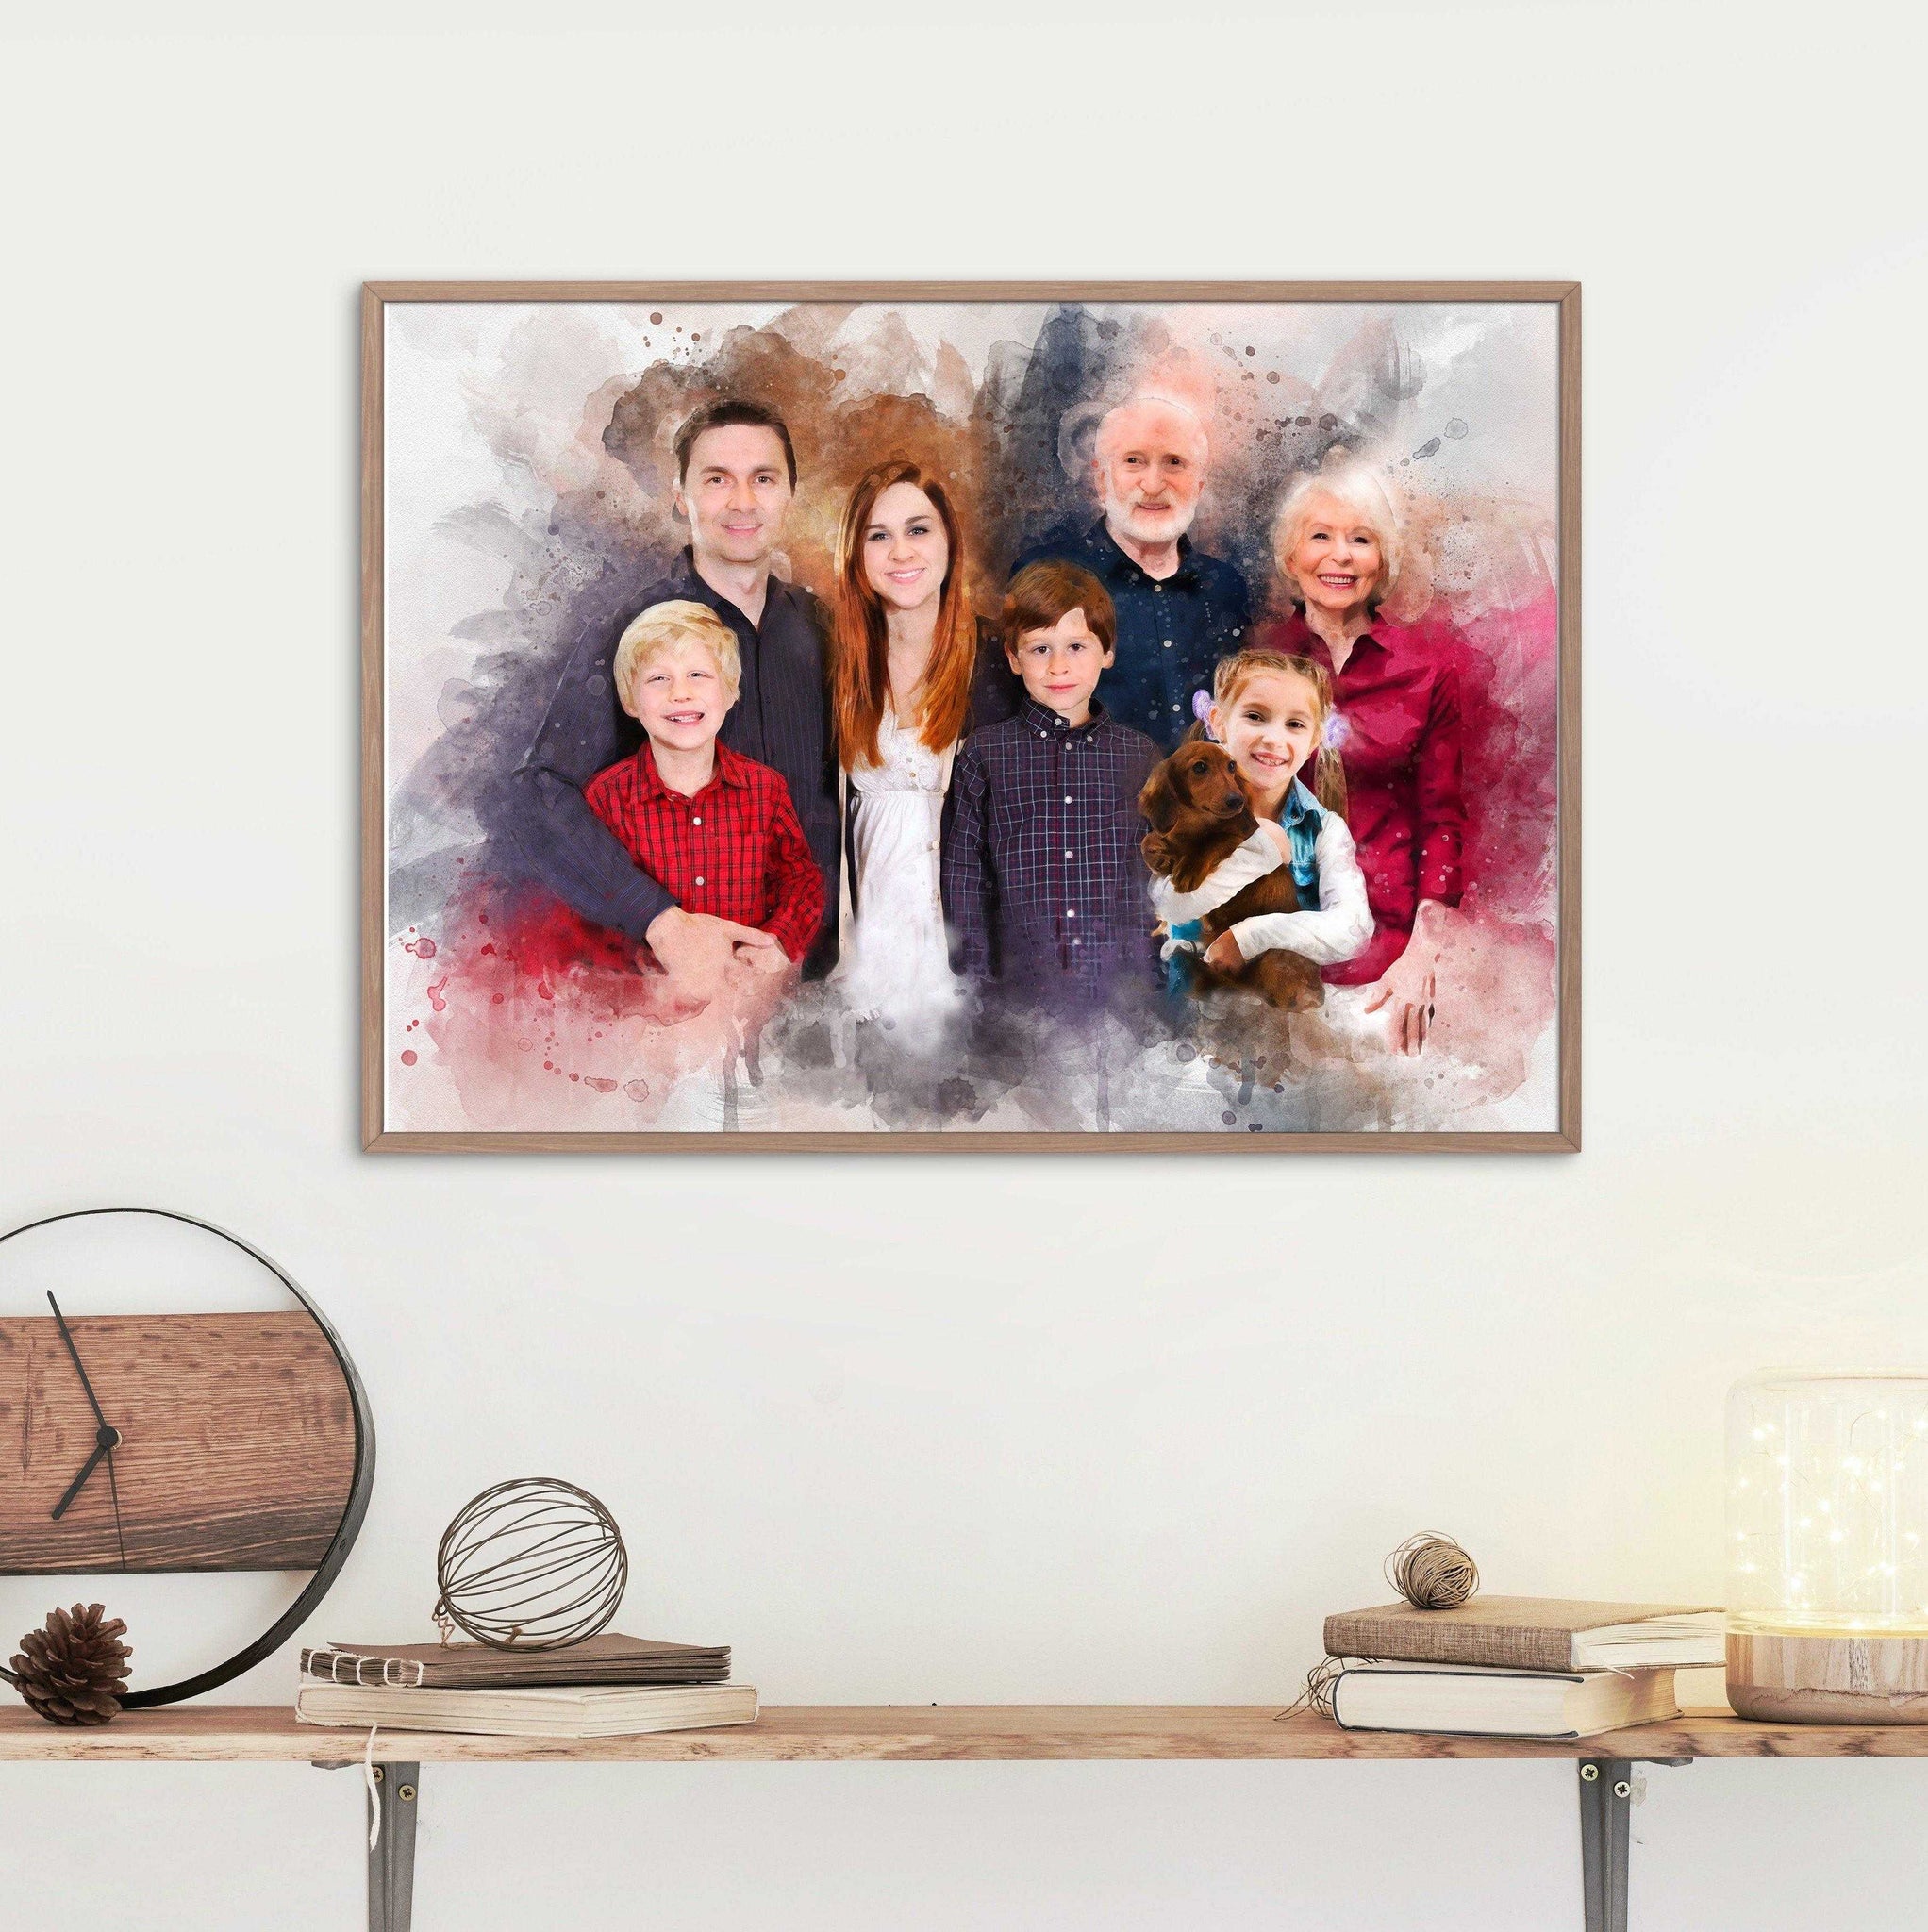 Adding People to Photos, Custom Portrait on Canvas - FromPicToArt